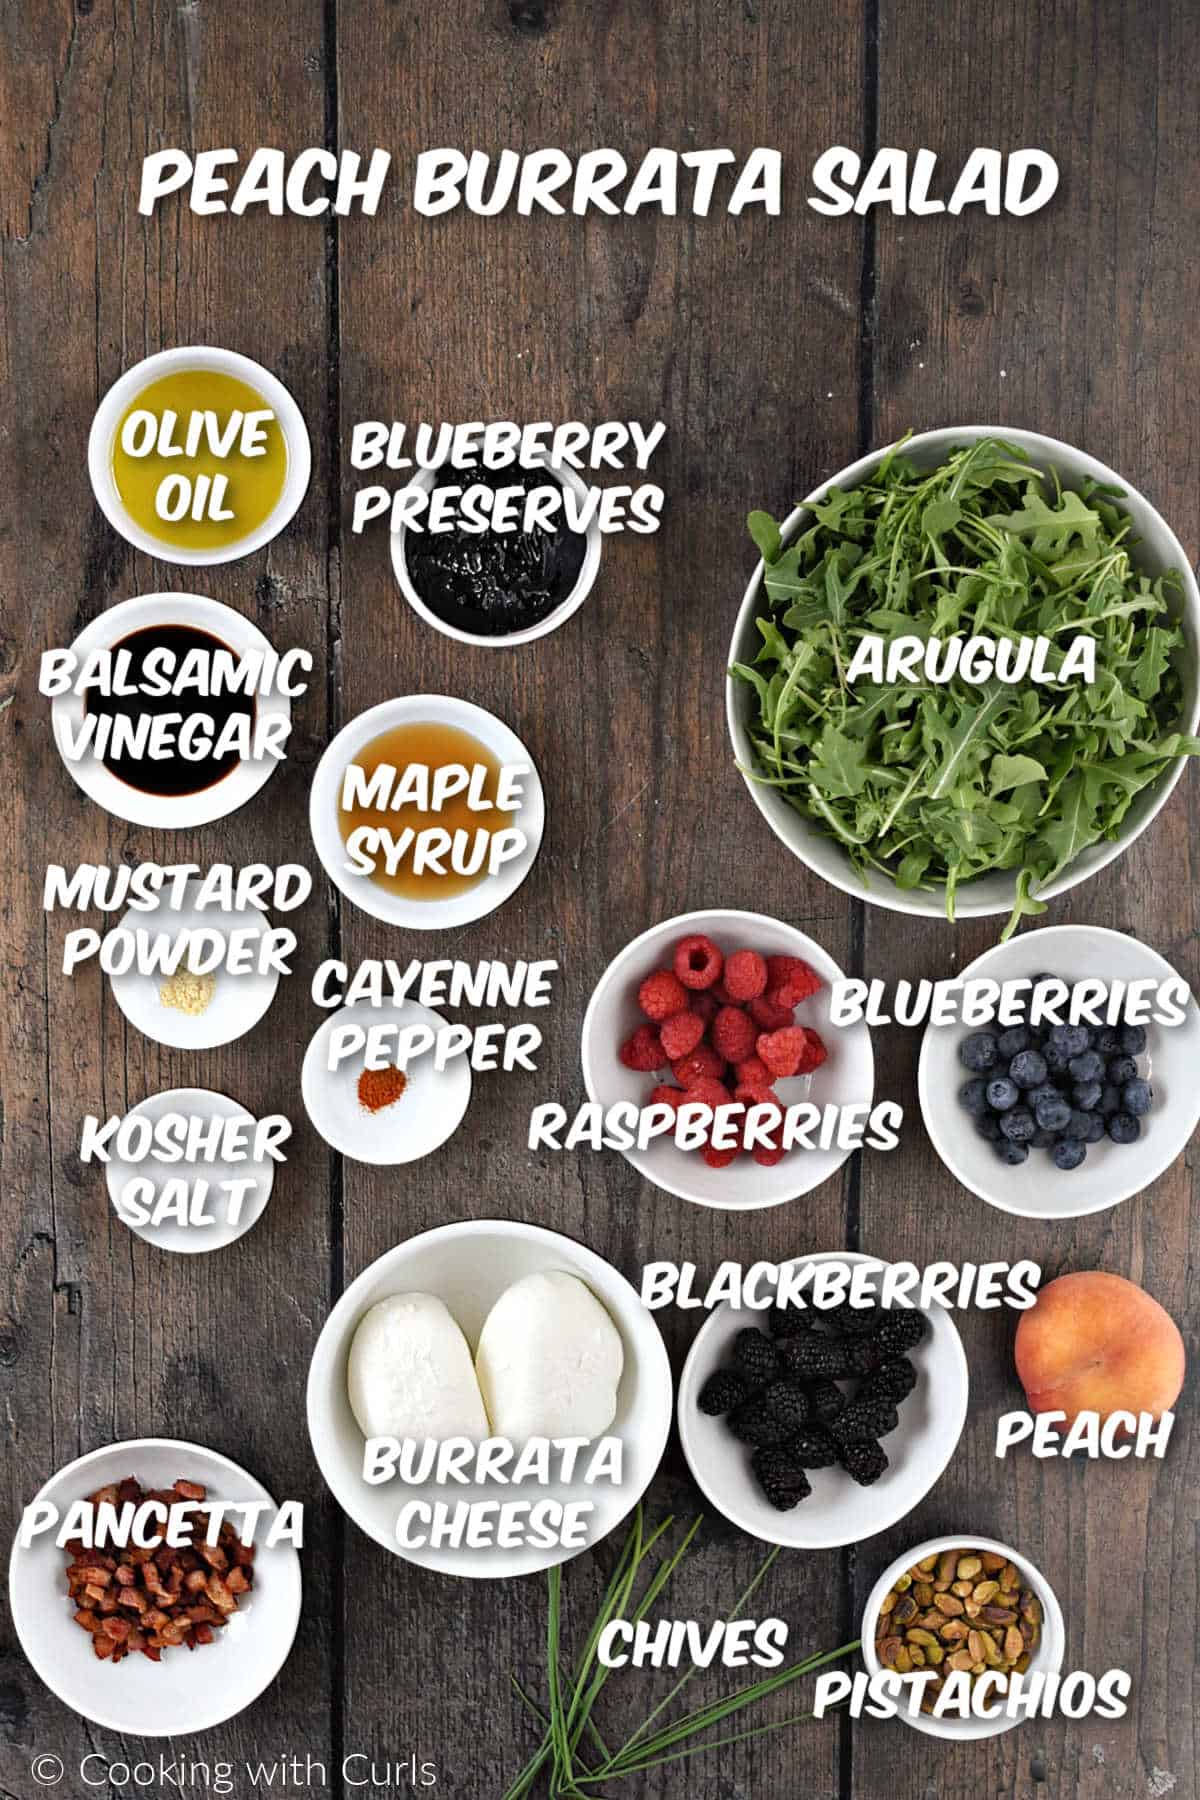 Ingredients needed to make peach burrata salad with berries.